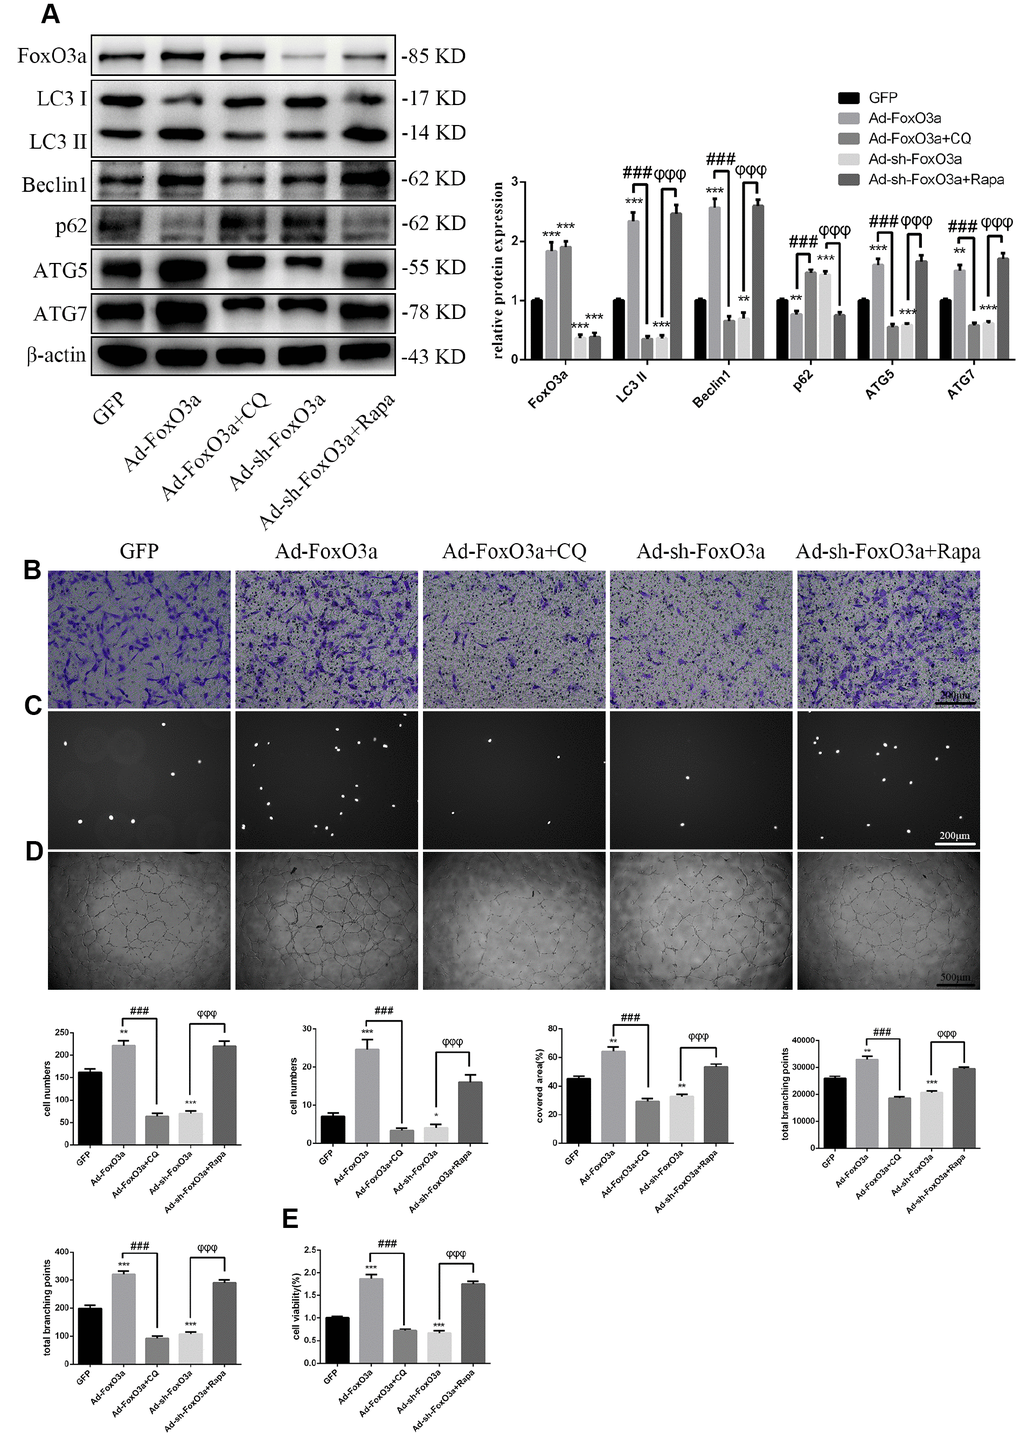 FoxO3a promotes EPC functionality through autophagy. (A) LC3 II, Beclin1, p62, ATG5, and ATG7 protein levels were detected by western blotting after GFP, Ad-FoxO3a, Ad-FoxO3a + CQ, Ad-sh-FoxO3a, or Ad-sh-FoxO3a + Rapa. (B) Cell migration was evaluated by Transwell migration assays after treatment for 48 h. (C) Cell adhesion ability was evaluated by matrix adhesion assays after treatment for 48 h. (D) Angiogenic ability was evaluated by Matrigel assays after treatment for 48 h. (E) Cell viability was evaluated with CCK-8 after treatment for 48 h. *P #P ##P ###P φP φφP φφφP 